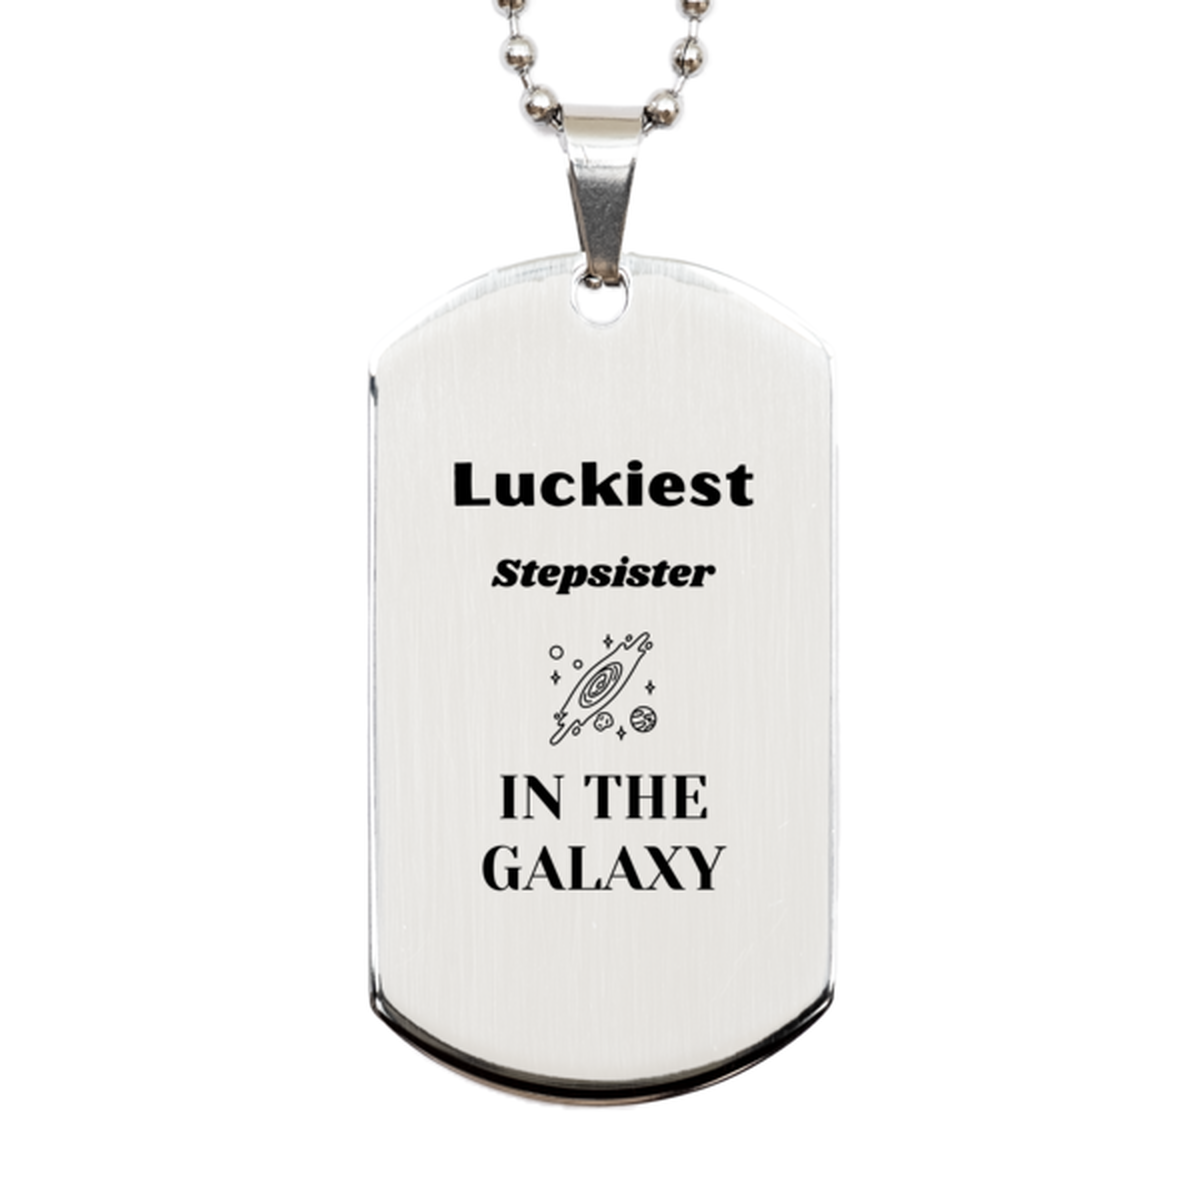 Luckiest Stepsister in the Galaxy, To My Stepsister Engraved Gifts, Christmas Stepsister Silver Dog Tag Gifts, X-mas Birthday Unique Gifts For Stepsister Men Women